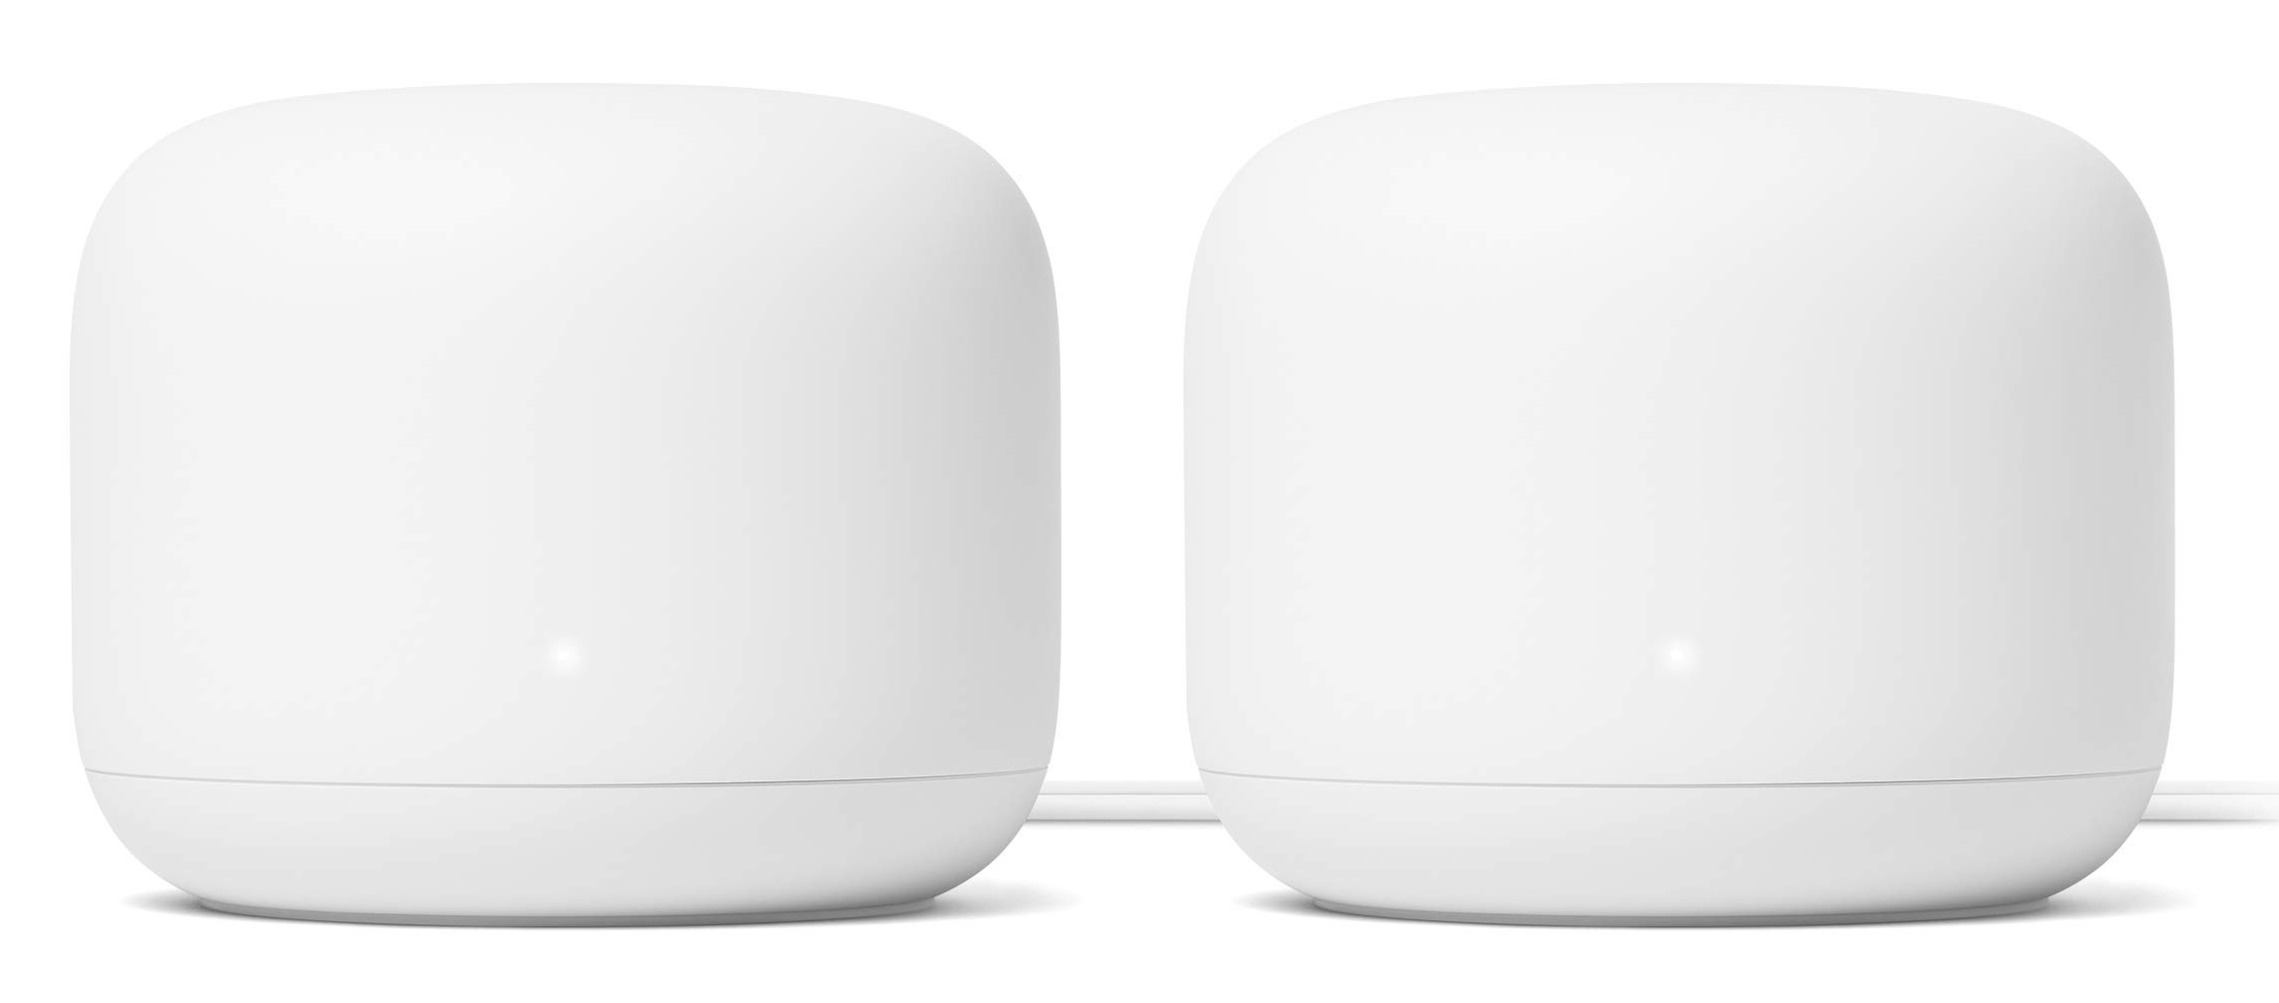 Google Nest Wifi Mesh Router for Wireless Internet - 2 Pack Router $118.00 +FS (each by $59.00)